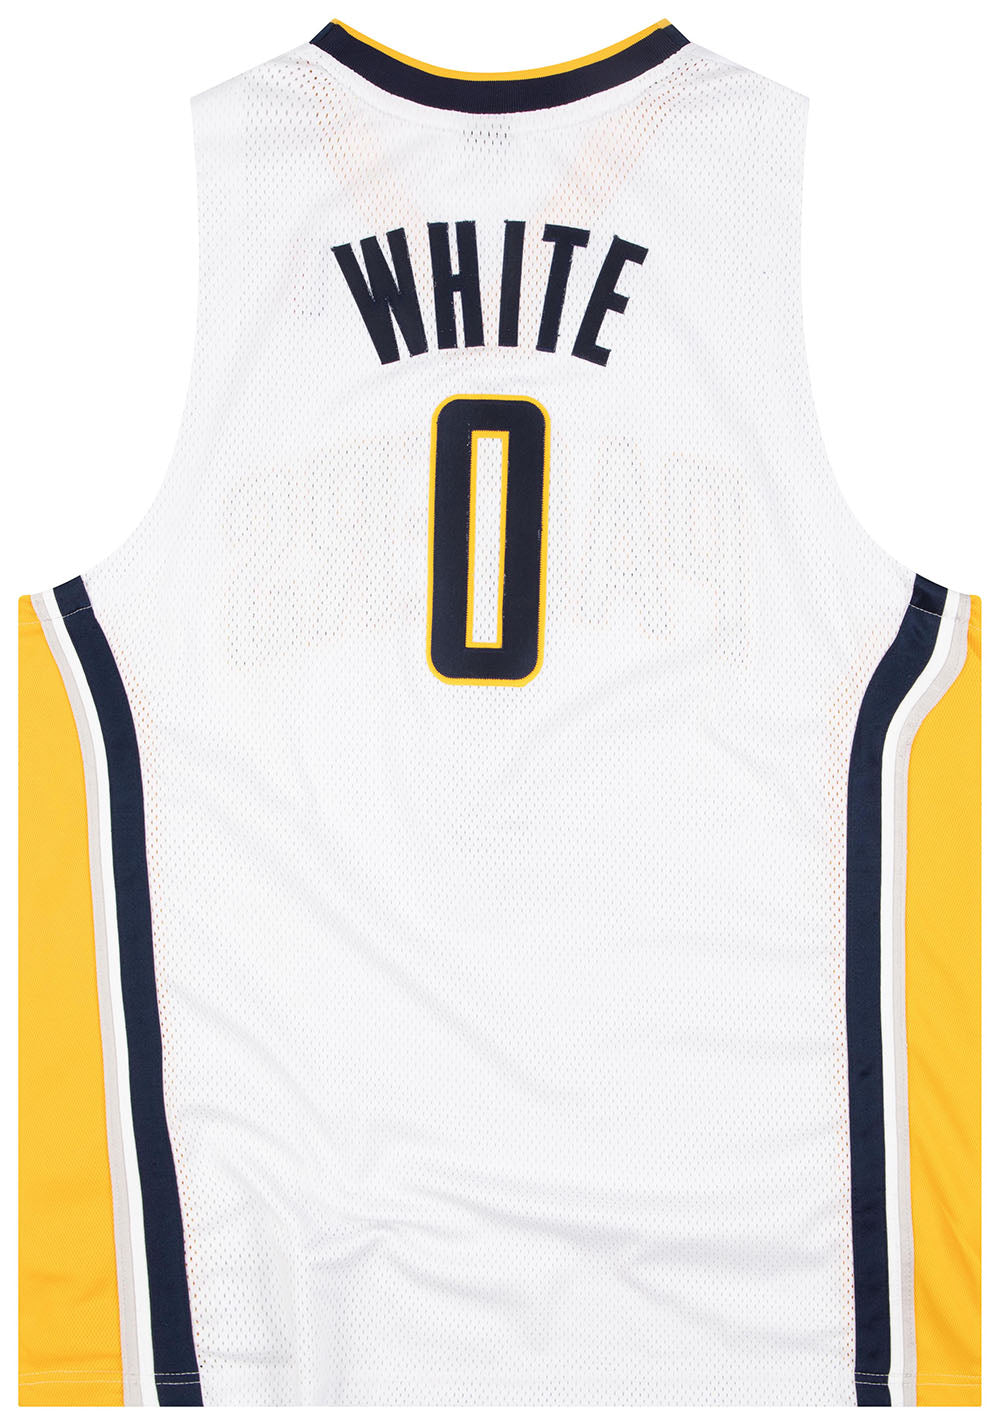 2005-06 AUTHENTIC INDIANA PACERS WHITE #0 REEBOK JERSEY (HOME) L